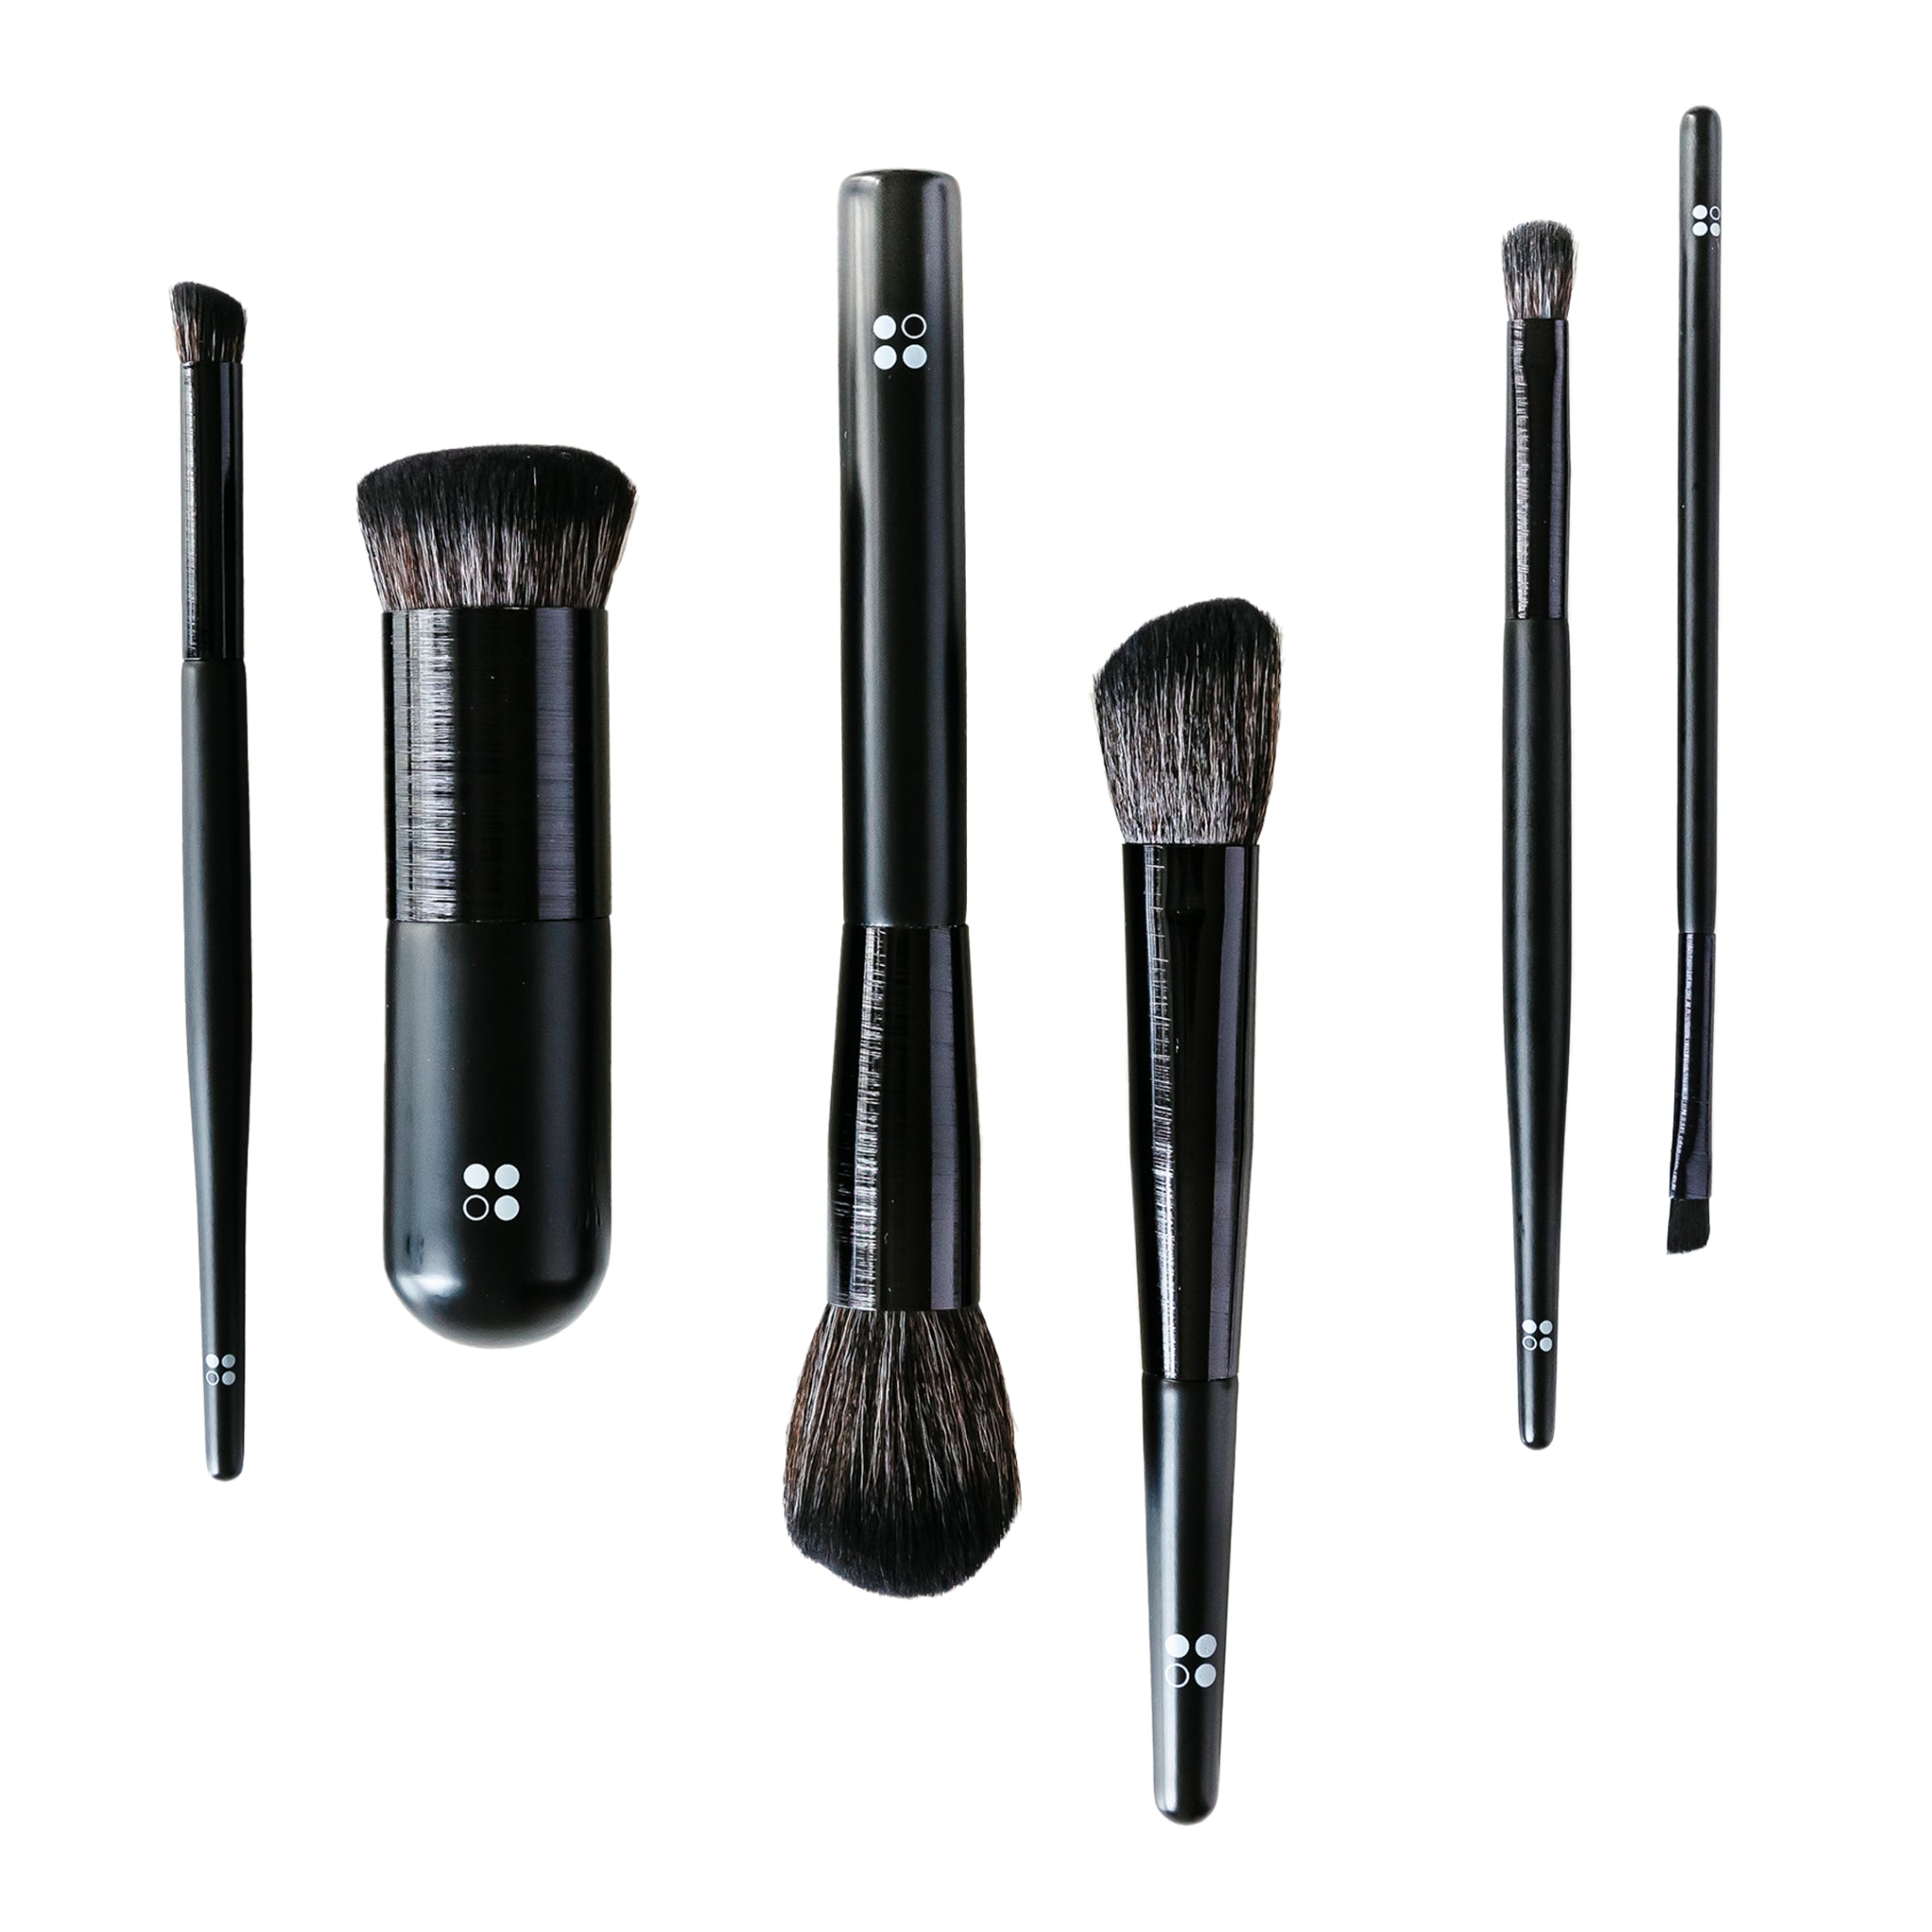 Touch of Your Hands professional brushes